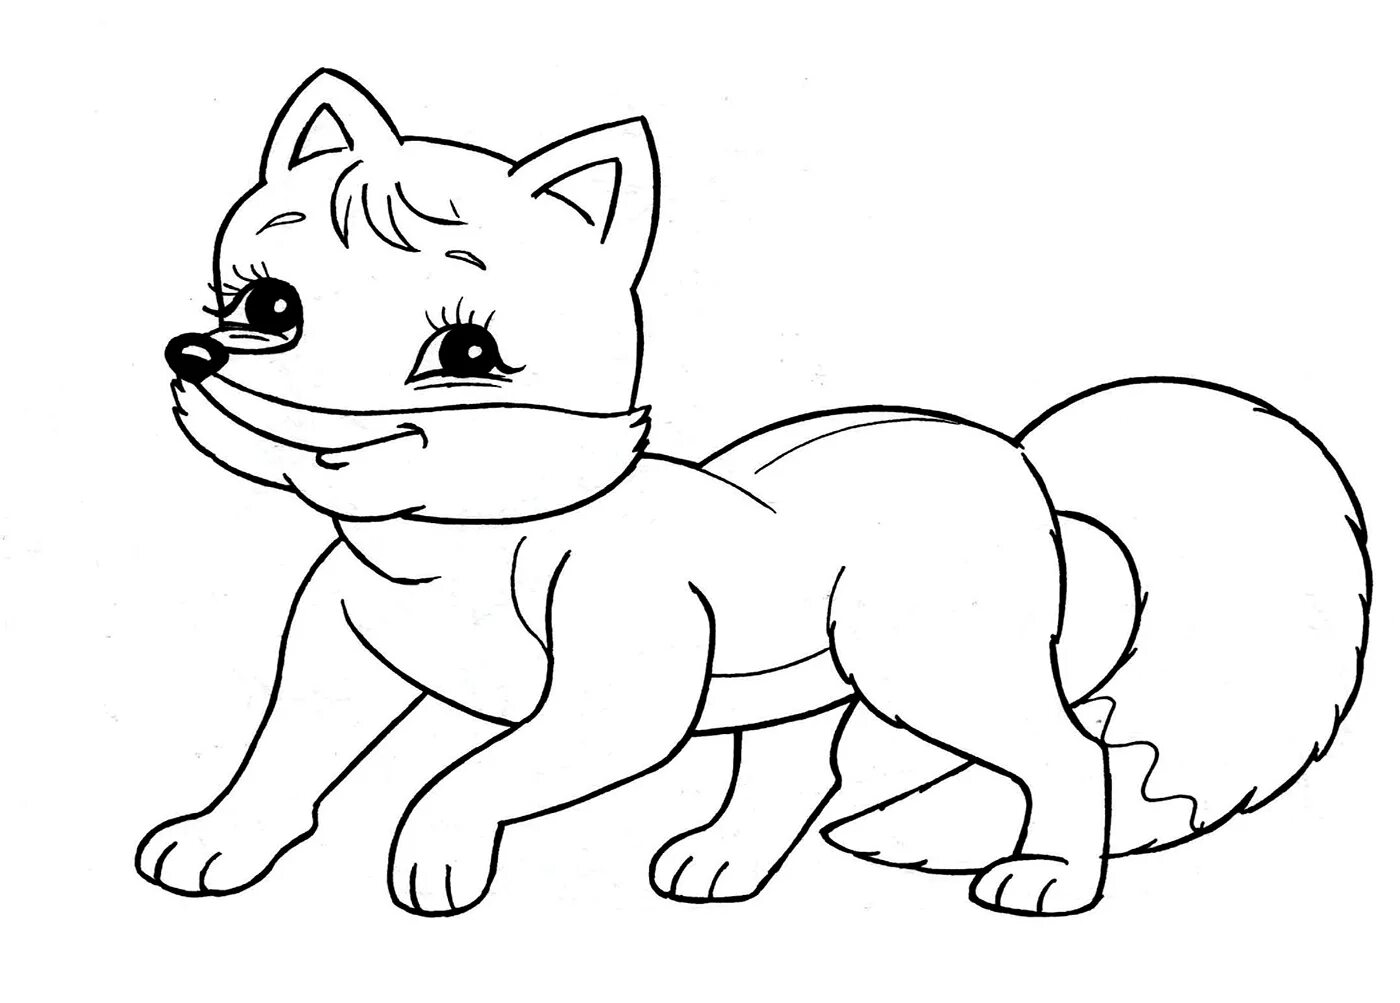 Awesome fox coloring pages for 2-3 year olds